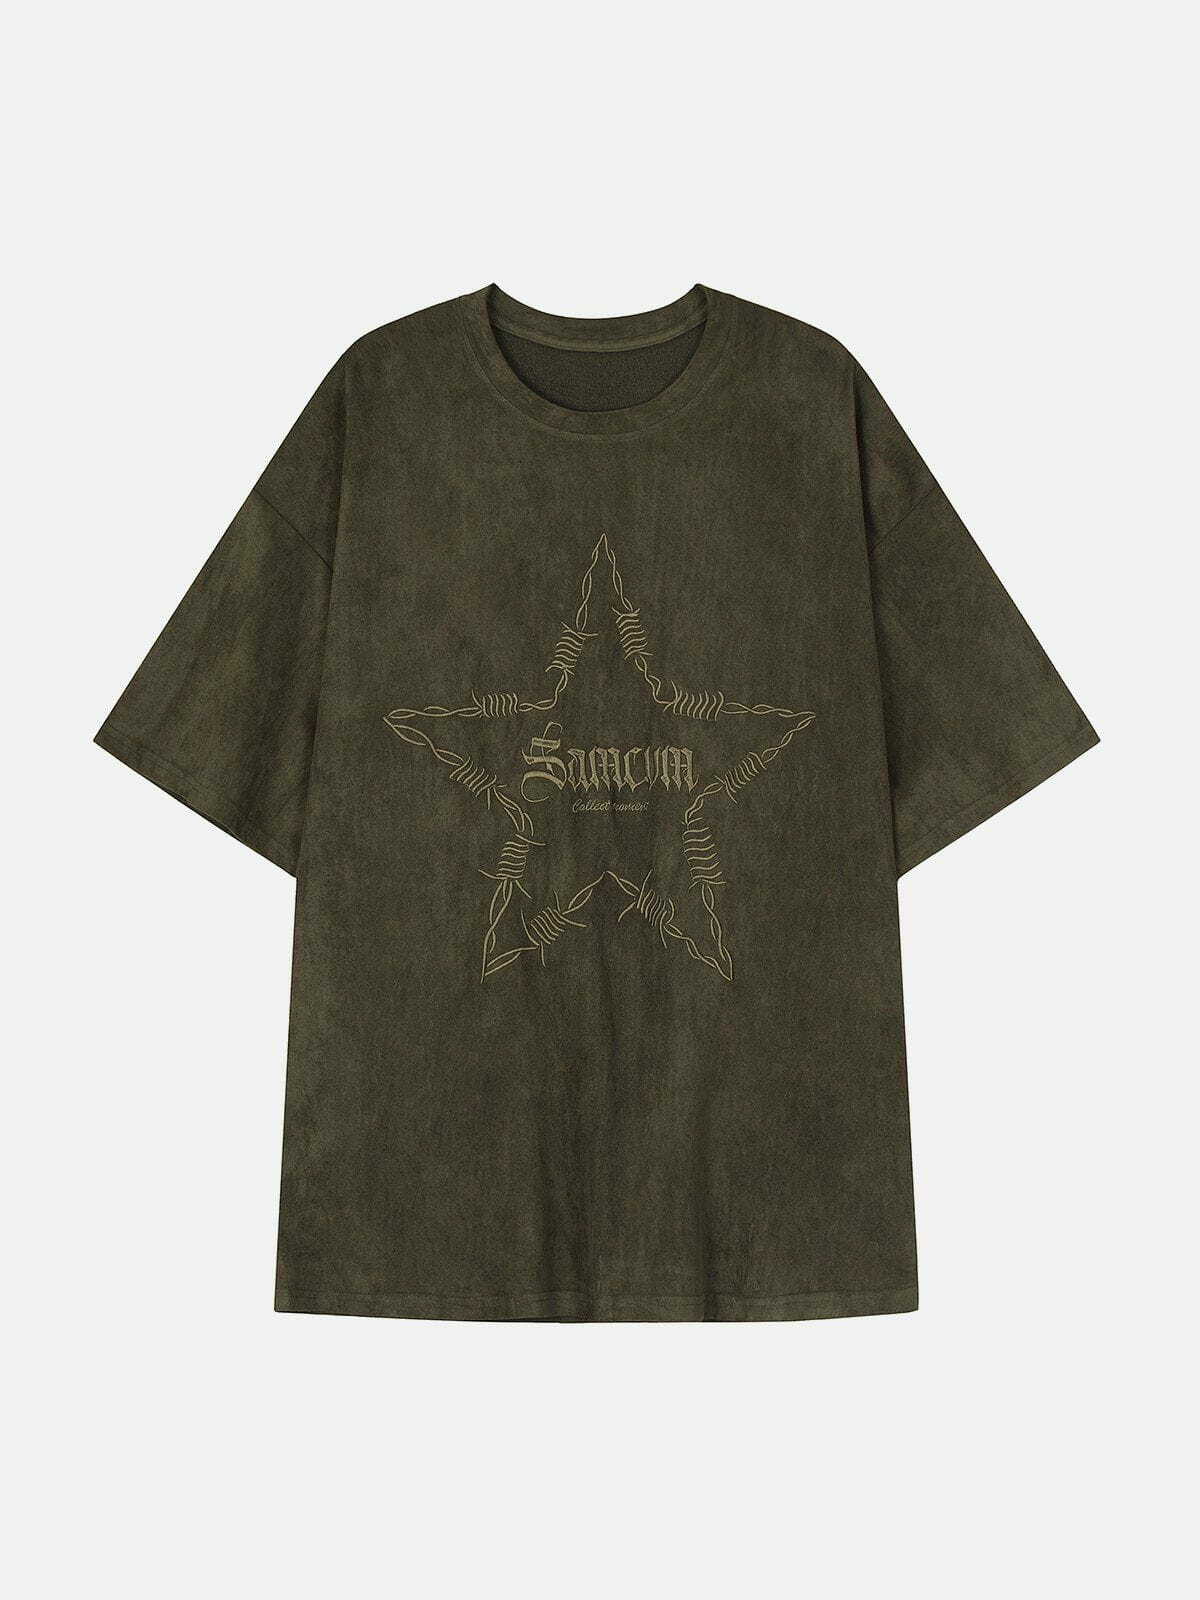 thorns and stars print tee edgy streetwear statement 2825